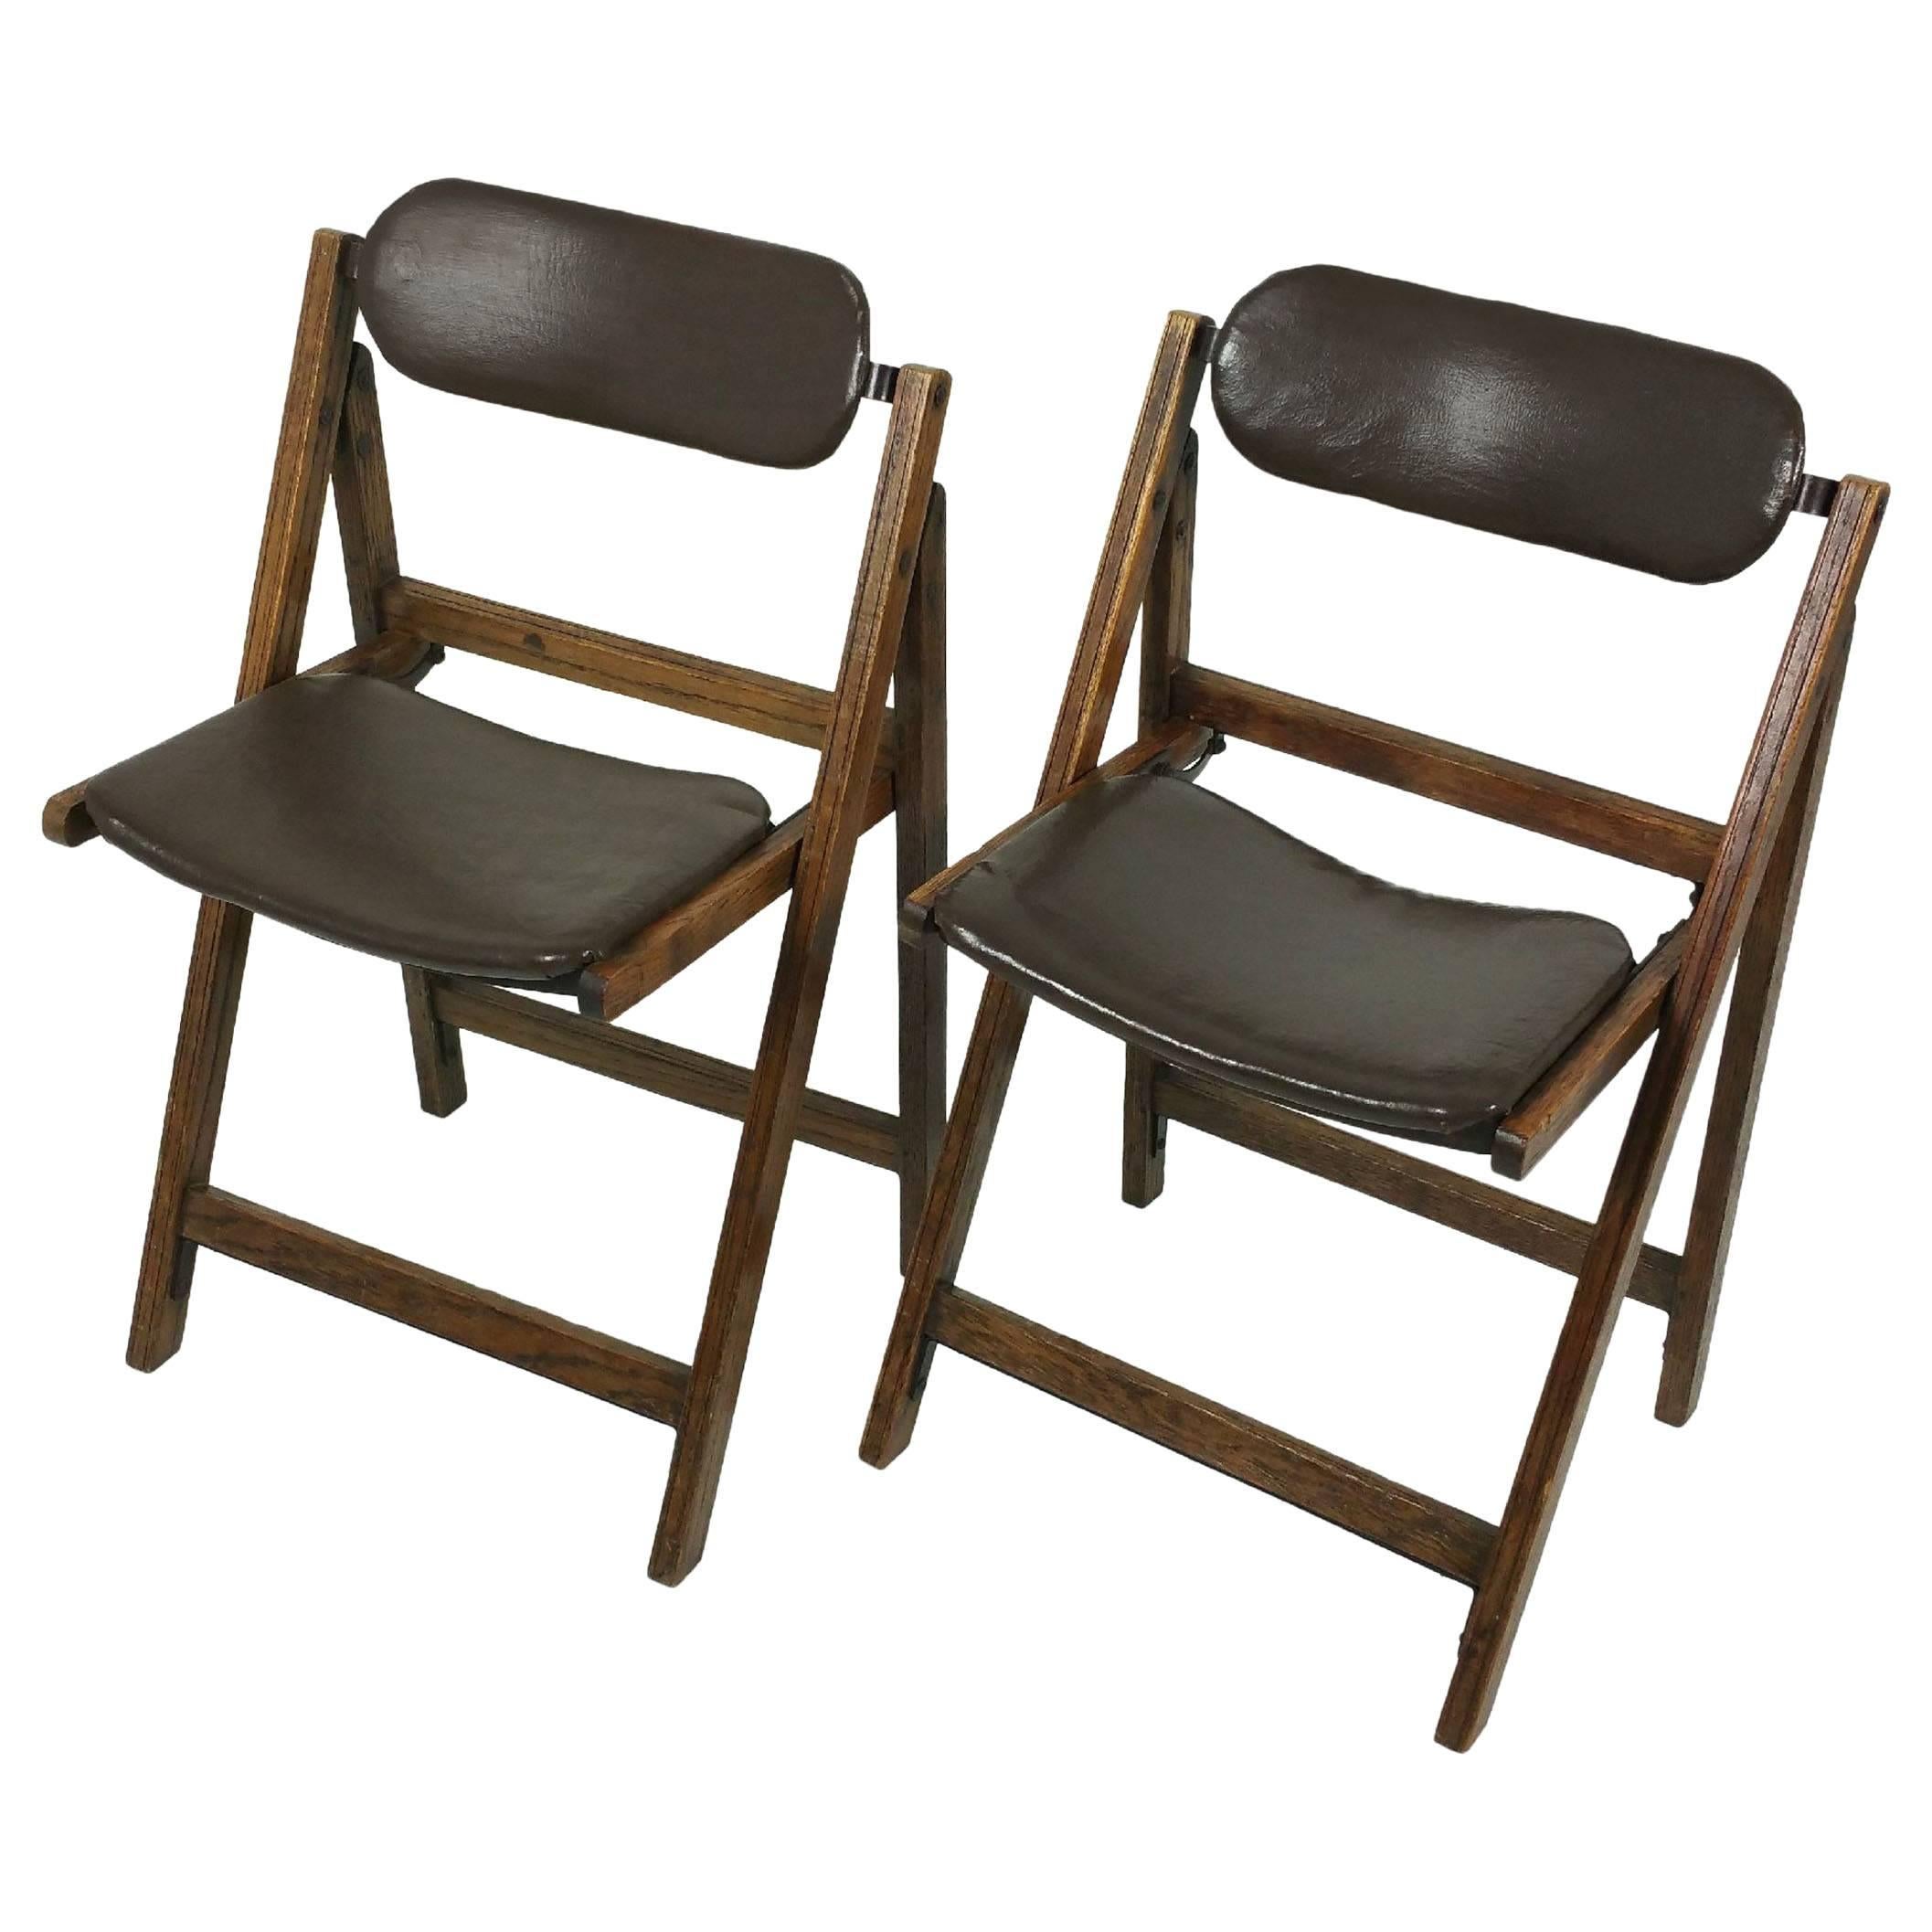 Pair of Edwardian Oak and Leather ‘Tansad’ Folding Chairs